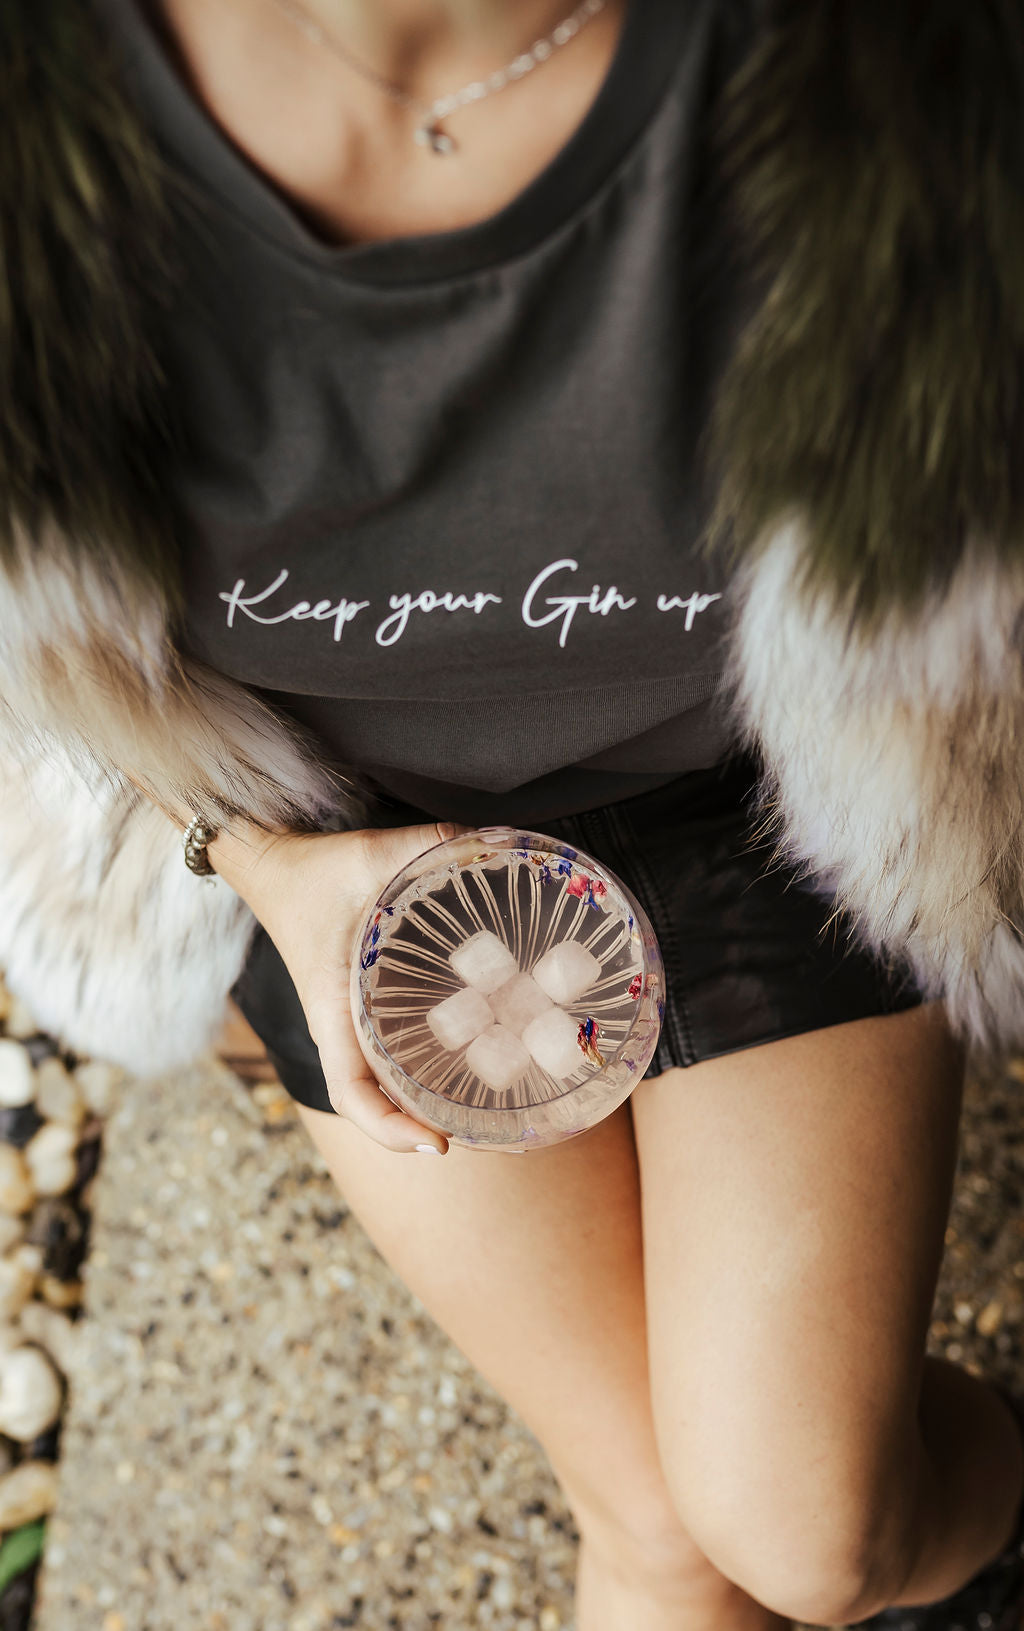 rose quartz gin stones in a glass of wine held by woman wearing Keep Your Gin Up shirt